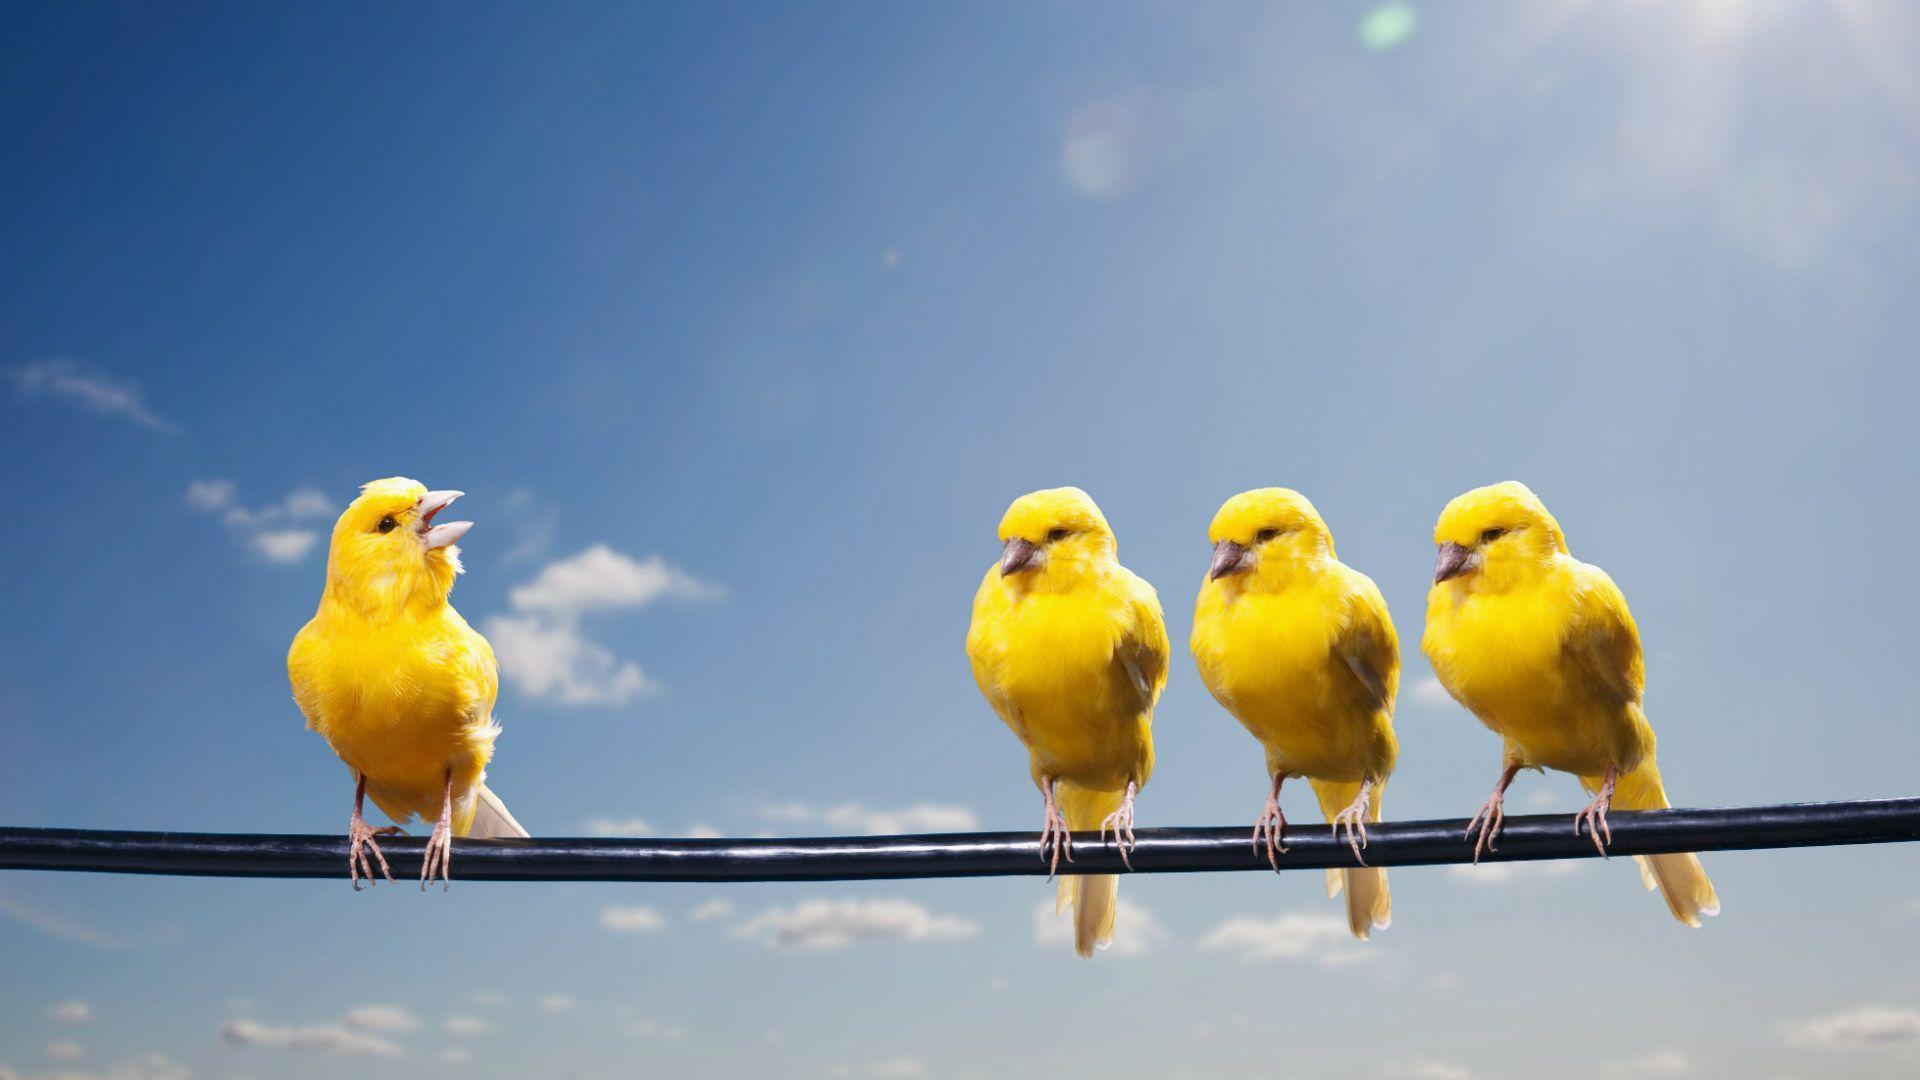 Canary Bird Wallpapers HD for Android - APK Download